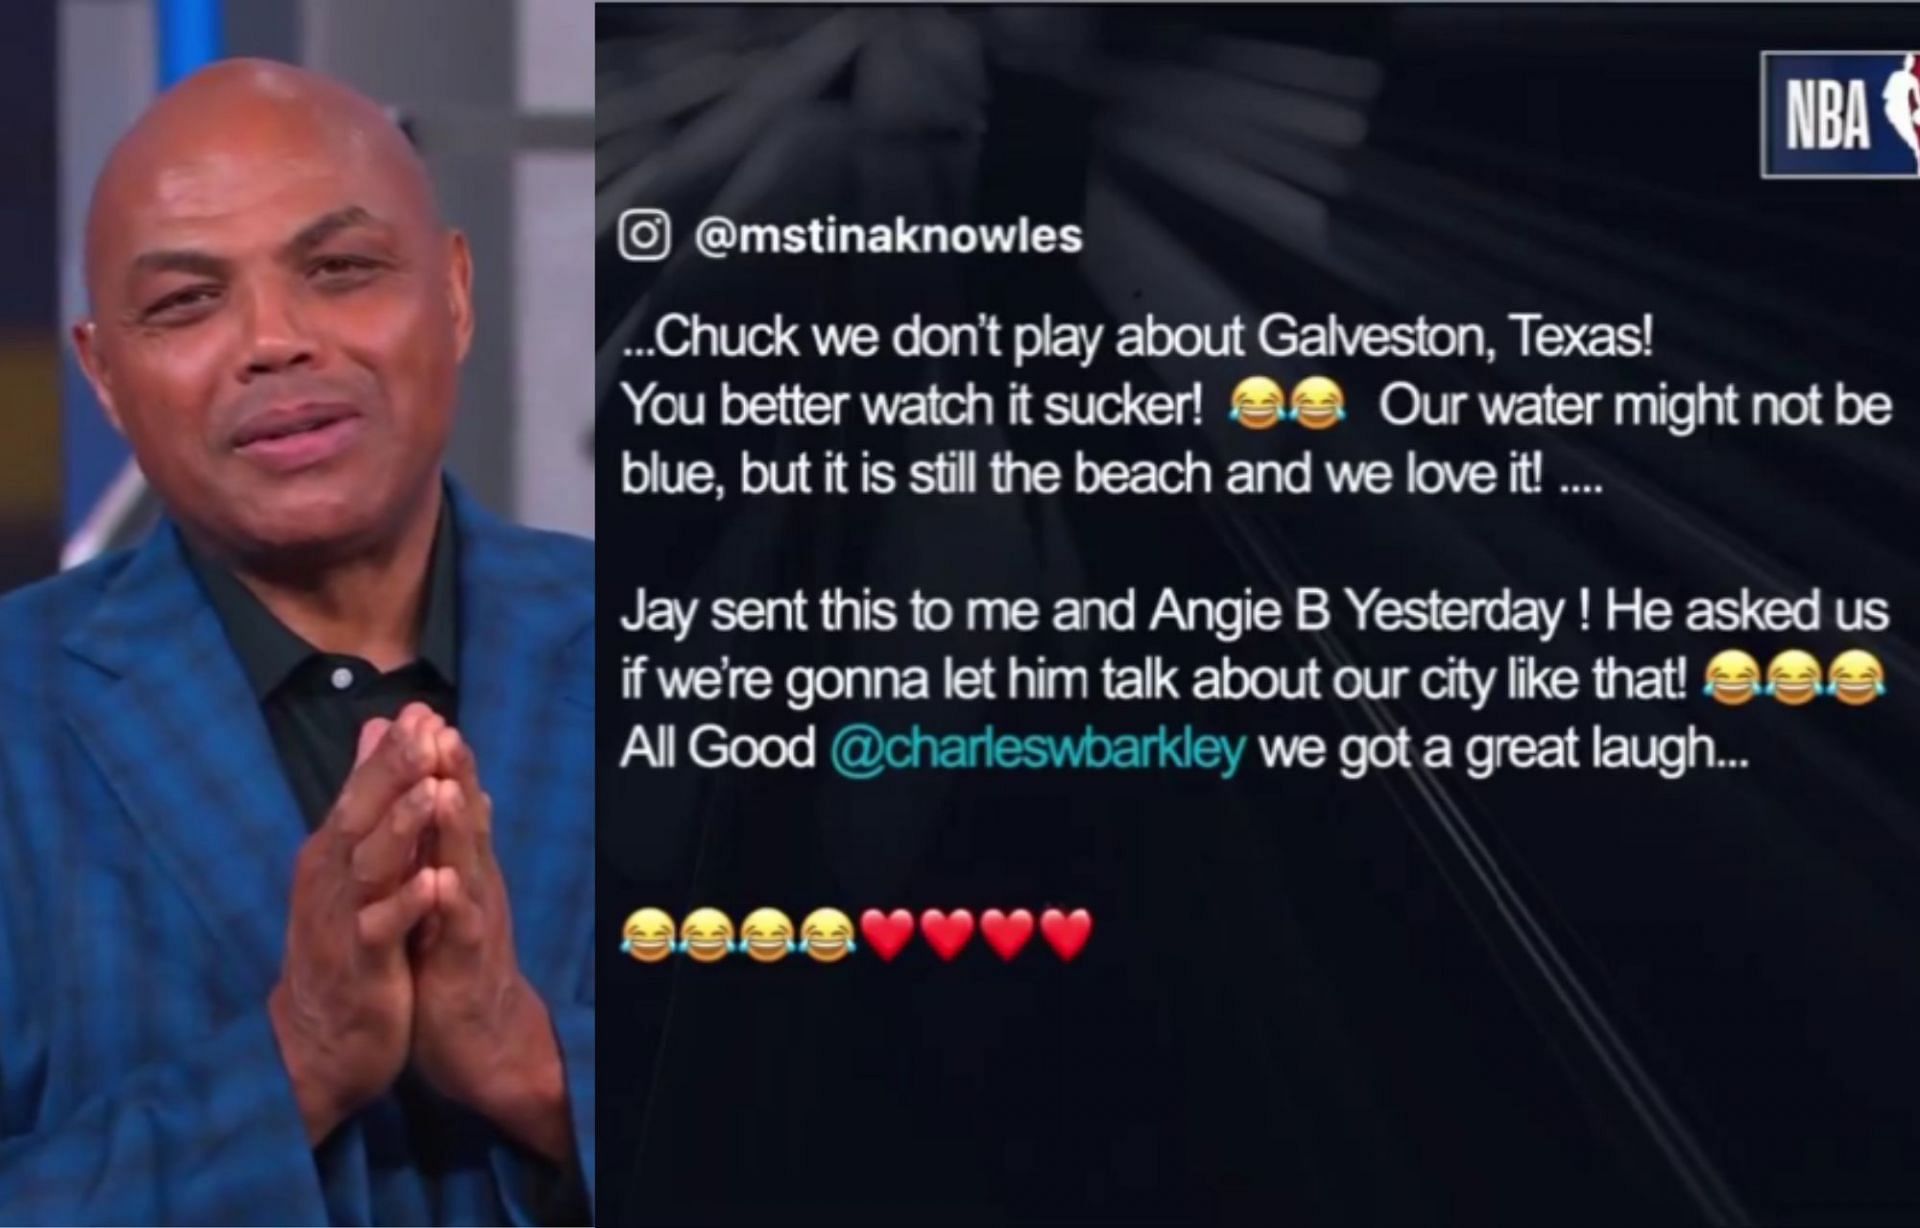 Charles Barkley apologizes to Tina Knowles after making Gaveston remarks